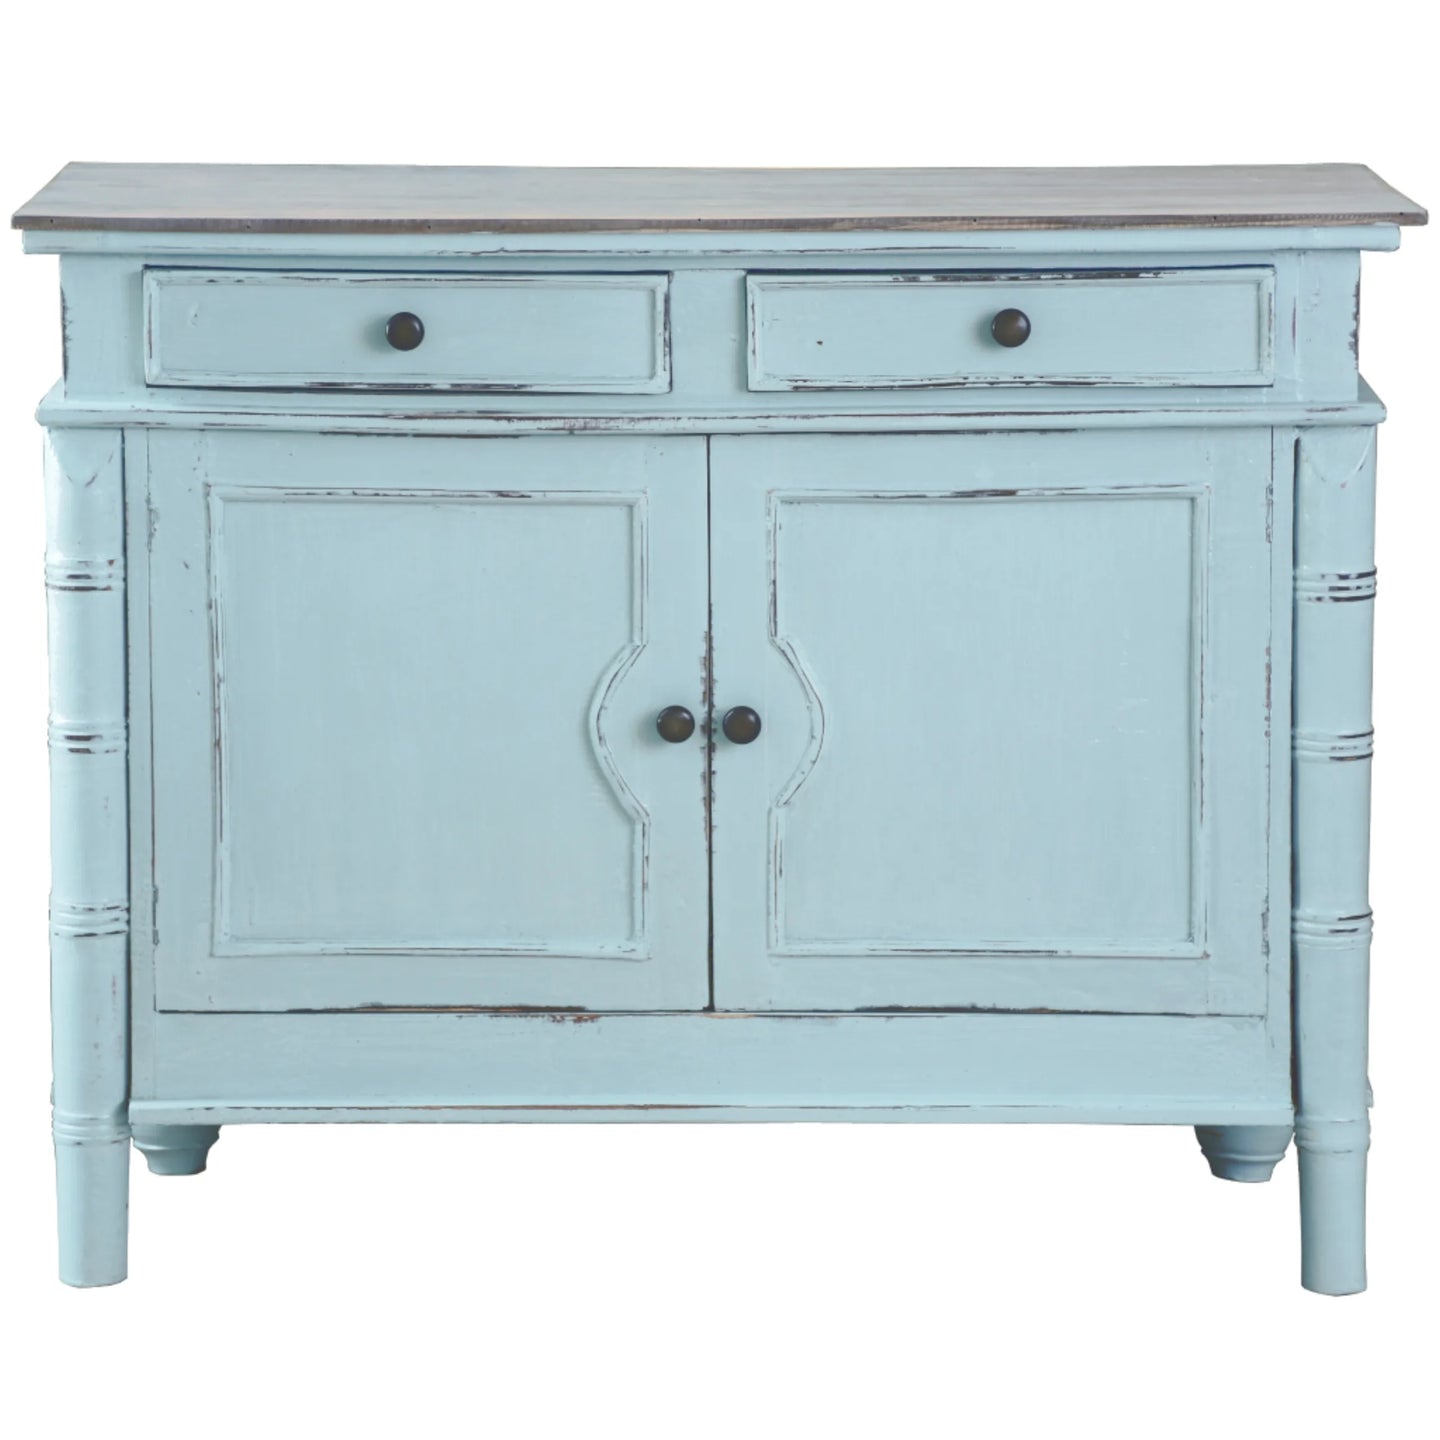 Sunset Trading Cottage Buffet Cabinet | Sky Blue/Natural Limewash Solid Wood | Fully Assembled Sideboard